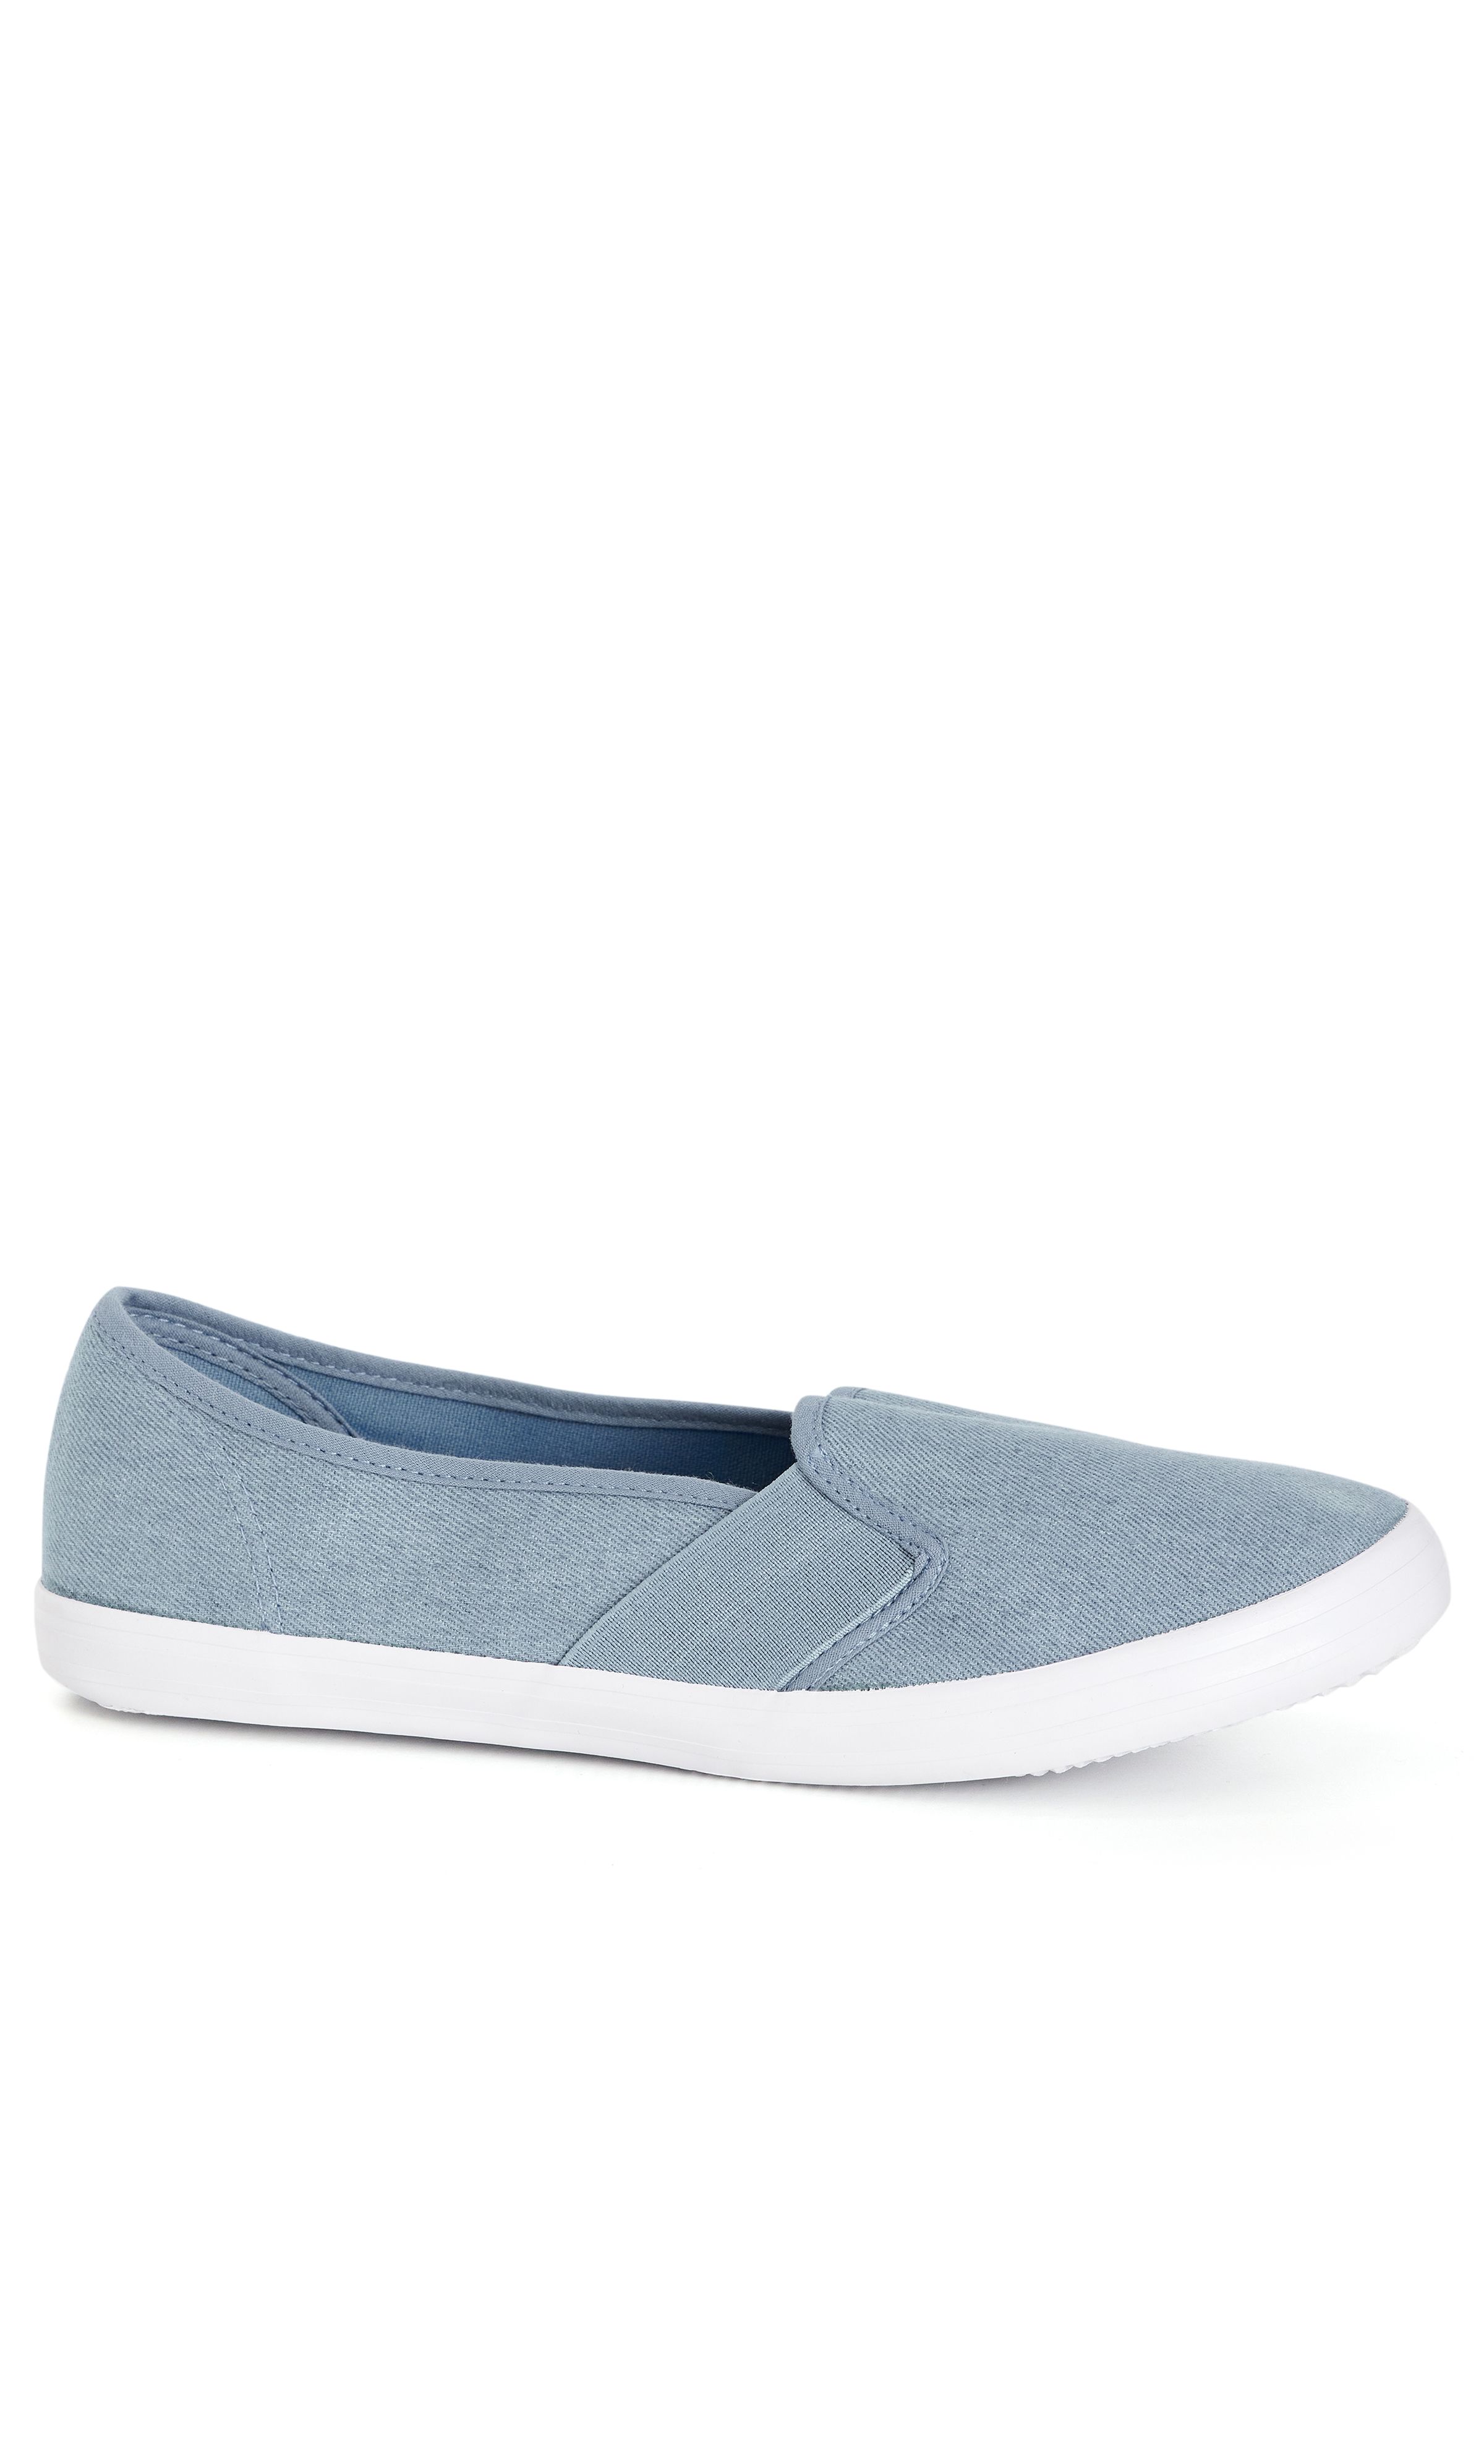 Our Denim Skater is a laidback casual staple, perfect for those off-duty days. Offering a chic denim fabrication and comfortable extra wide fit, this versatile pair will see you through shopping days, errand runs and coffee dates alike. Key Features Include: - Round toe - Elastic side gussets - Denim upper - Slip on style - Contrast sole For a go-to weekend look, team with a crisp slogan tee and skinny jeans.